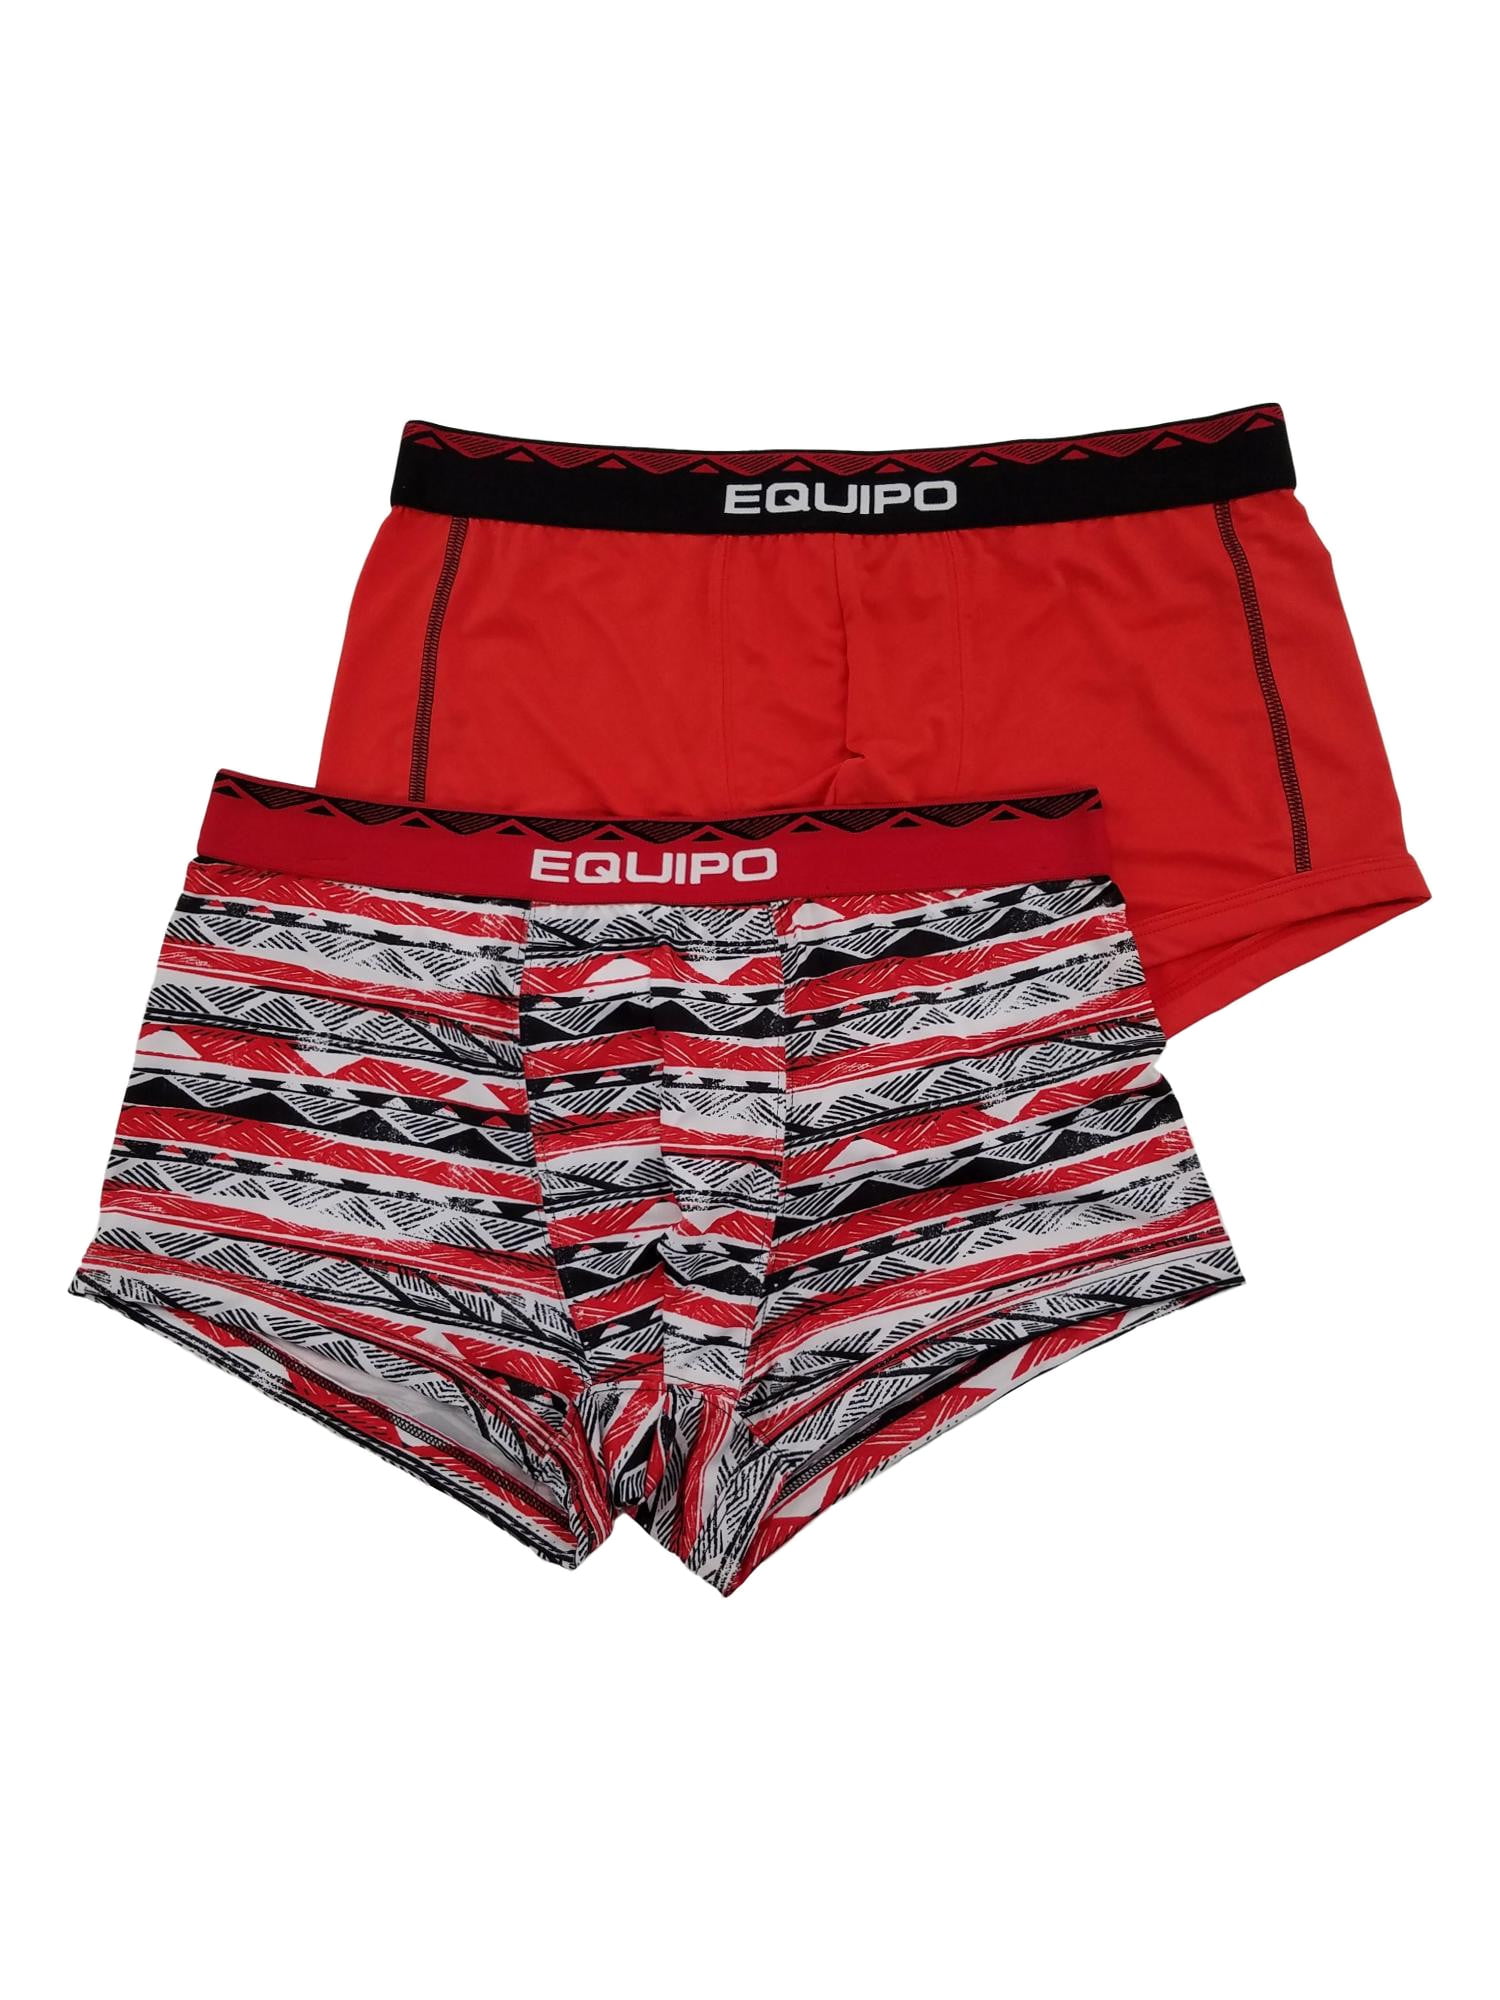 Equipo Mens 2-Pack Quick Dry Performance Stretch Brazilian Trunks